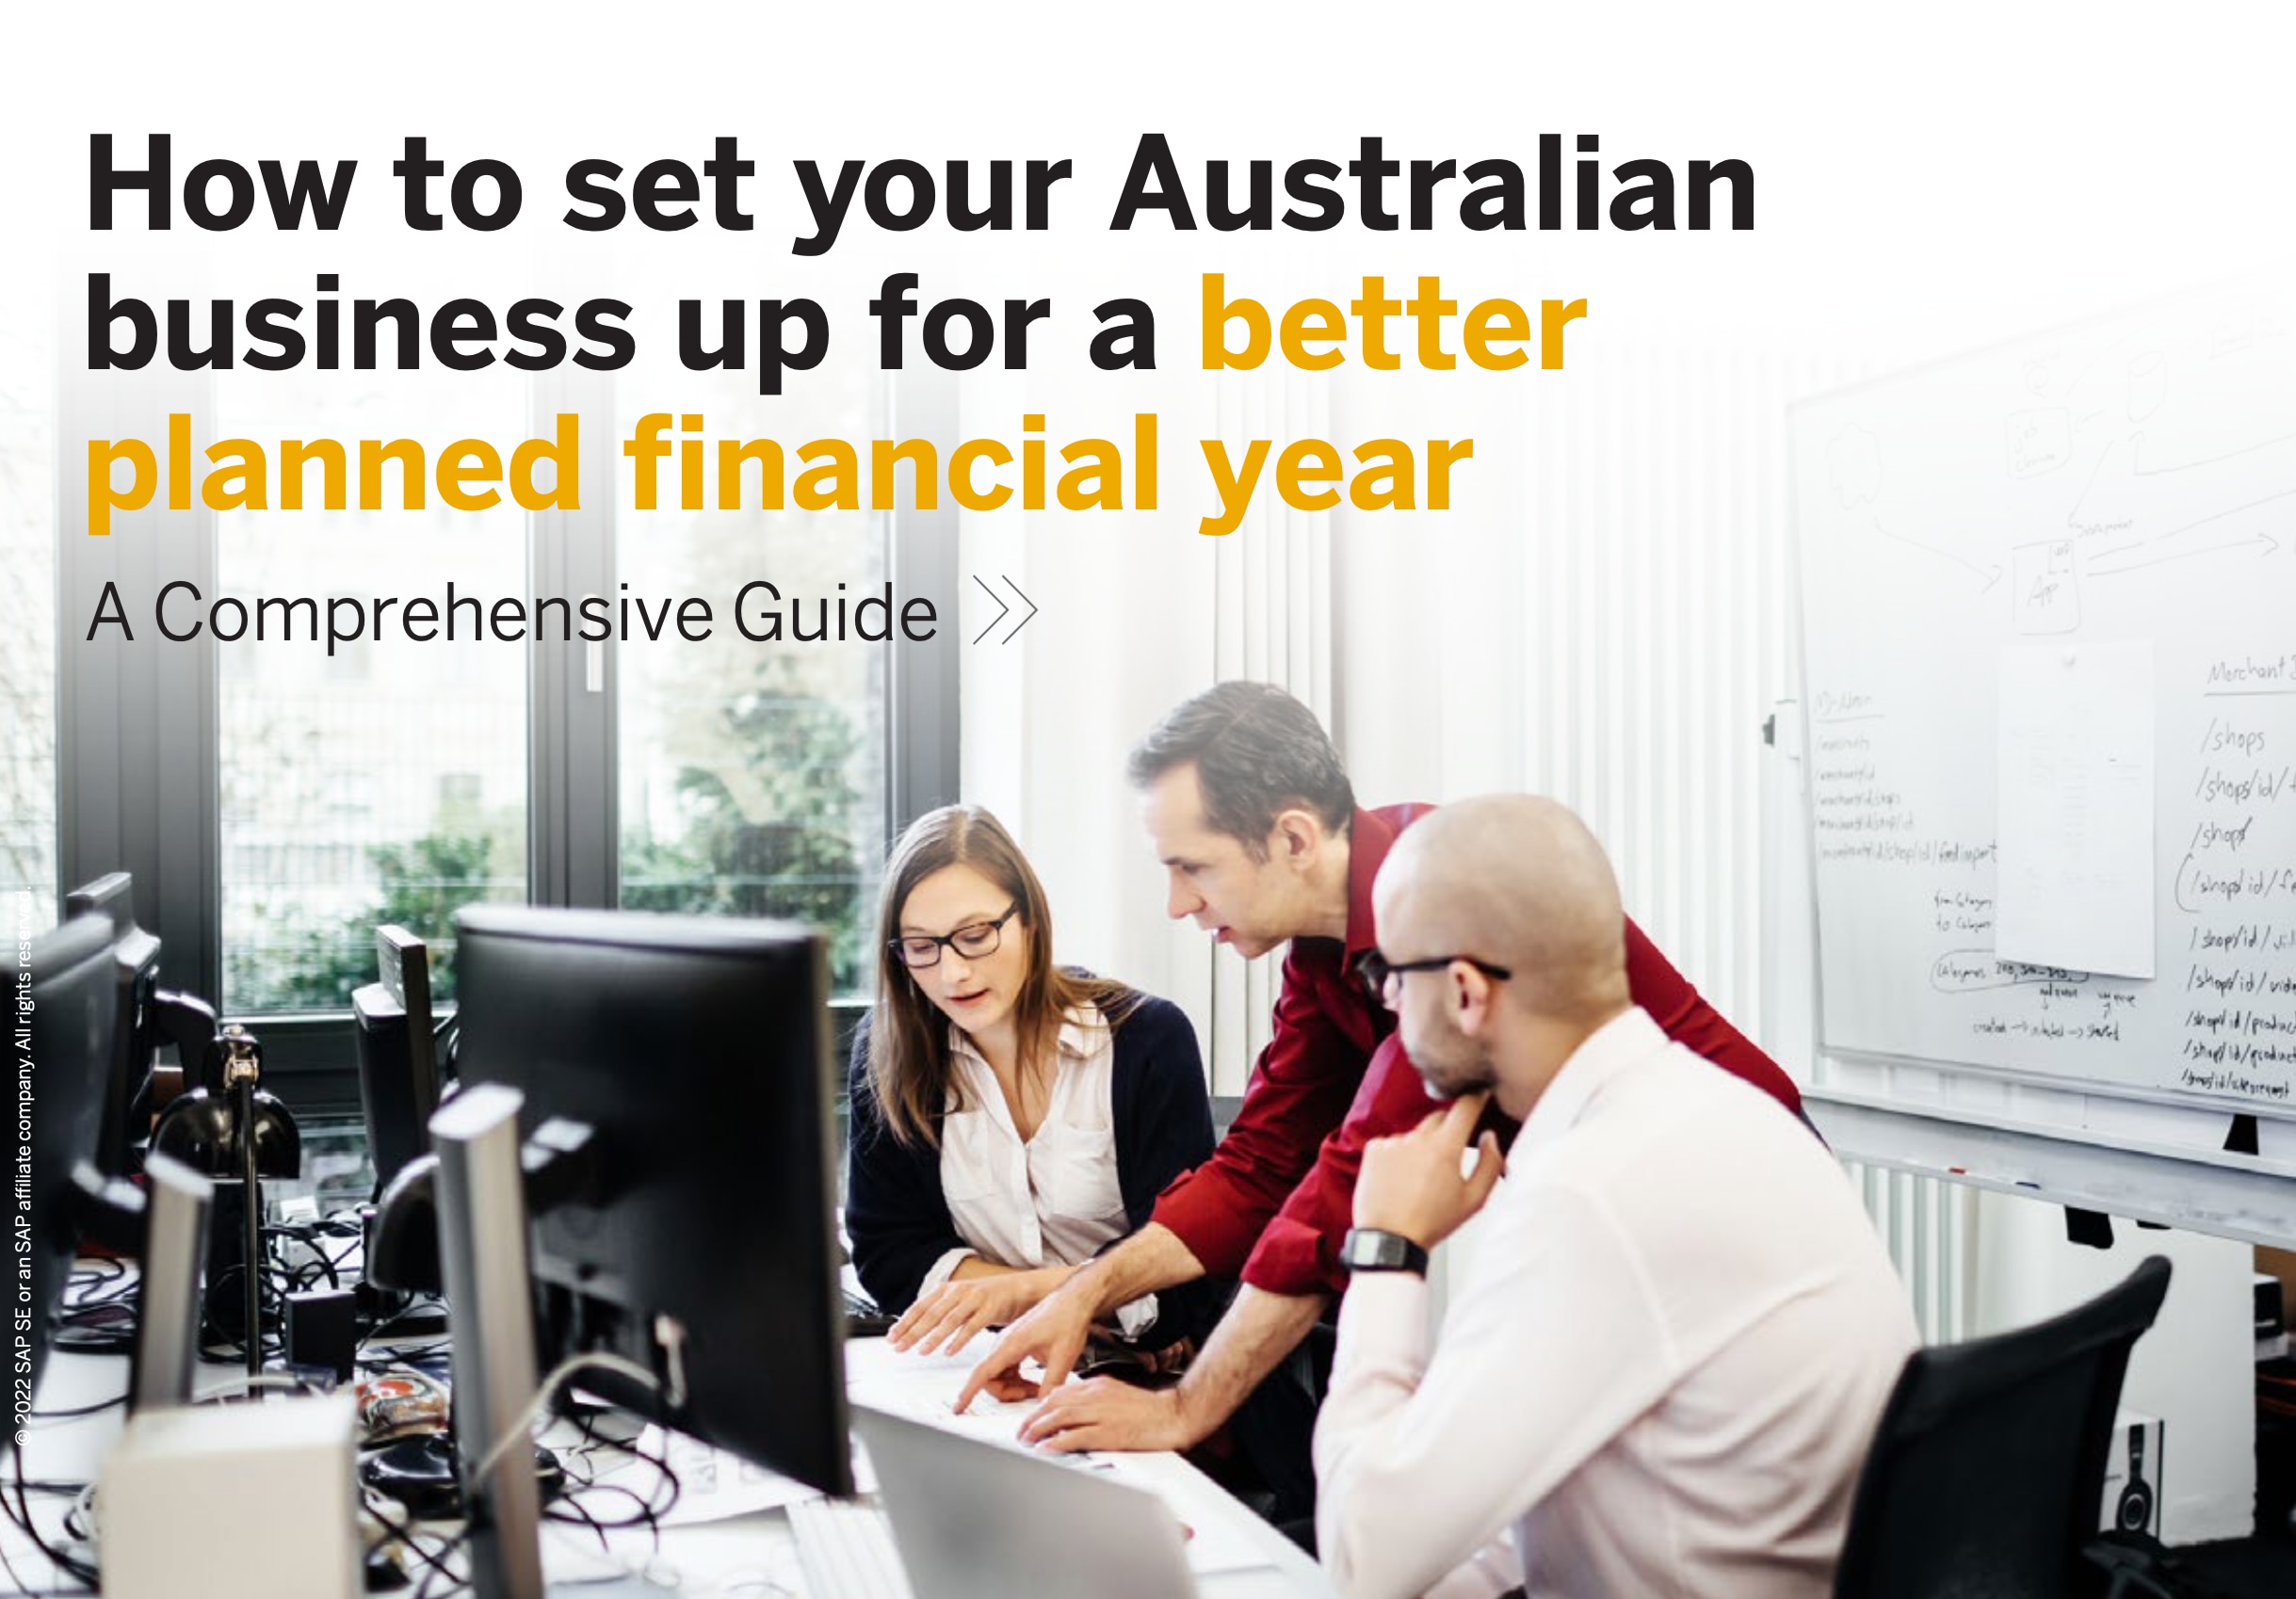 How to set your Australian business up for a better planned financial year